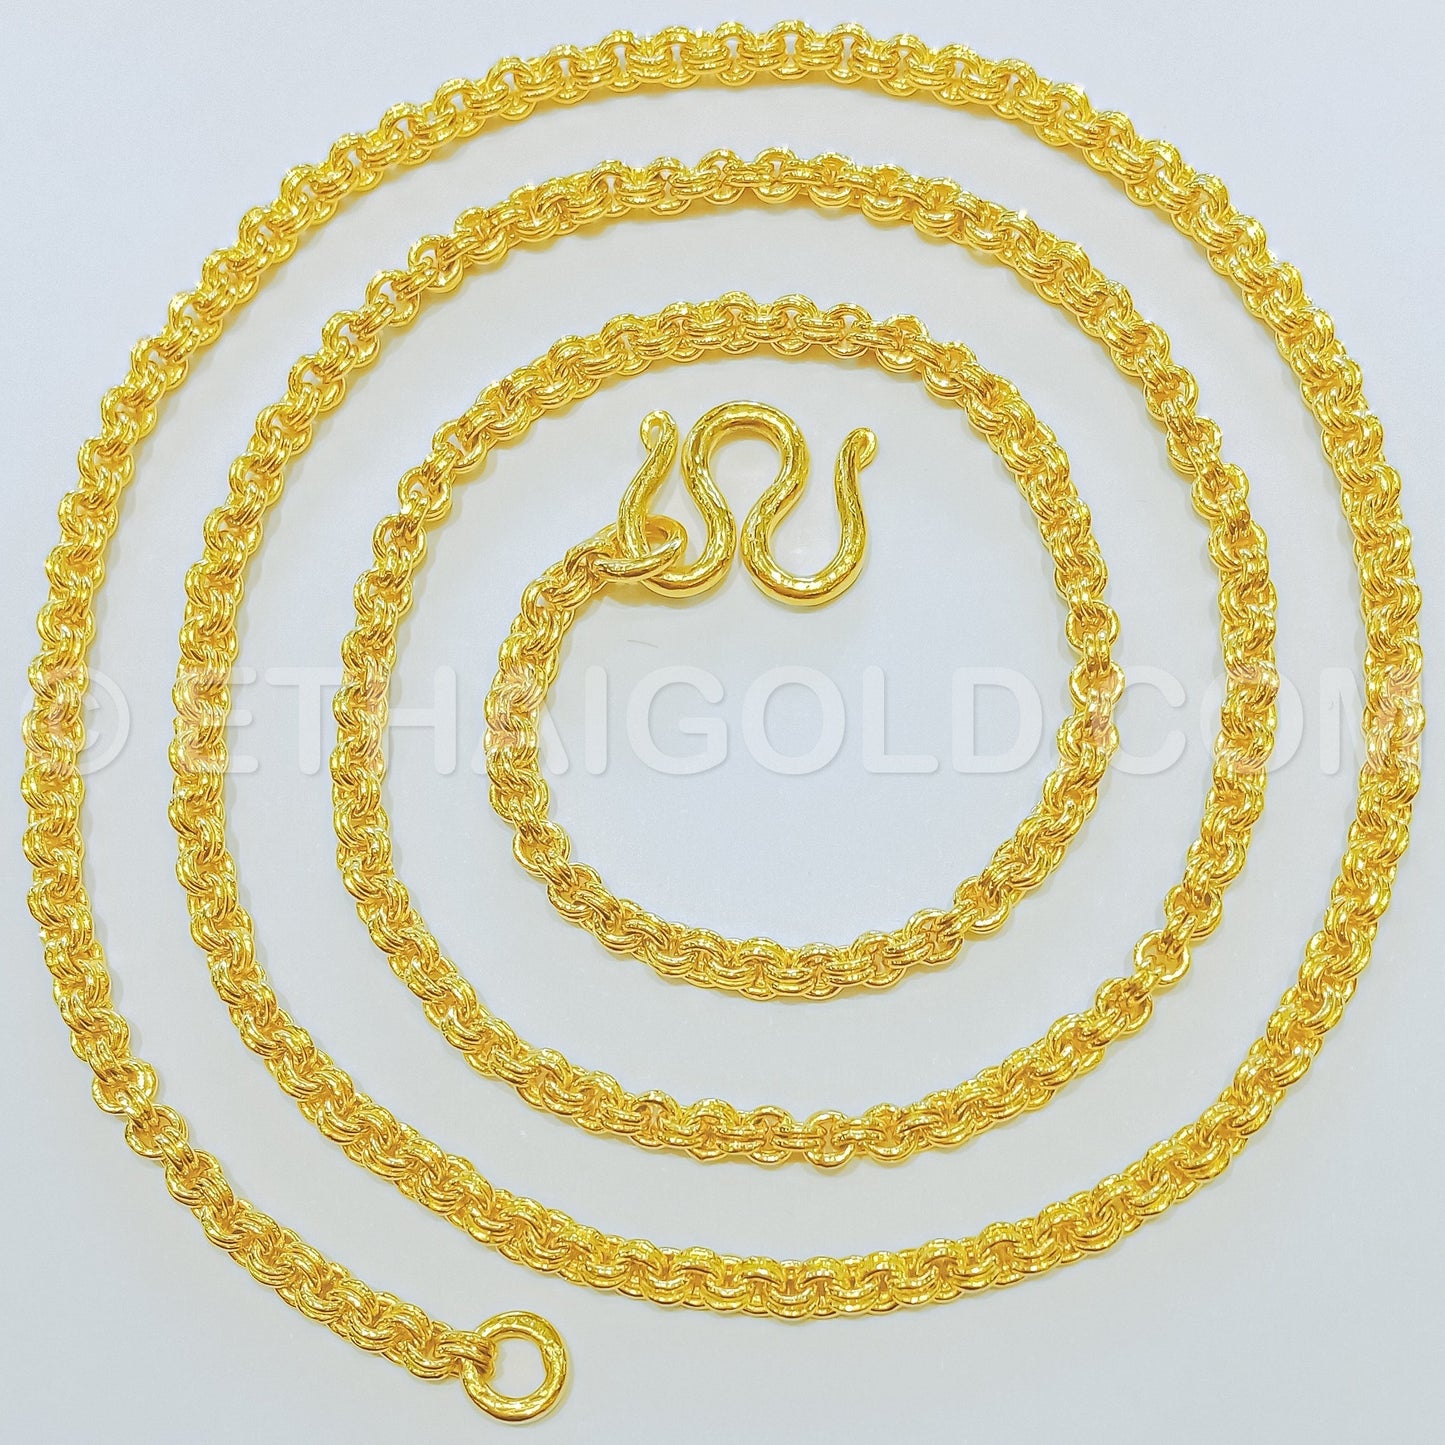 4 BAHT POLISHED SOLID DOUBLE LINK CHAIN NECKLACE IN 23K GOLD (ID: N1104B)